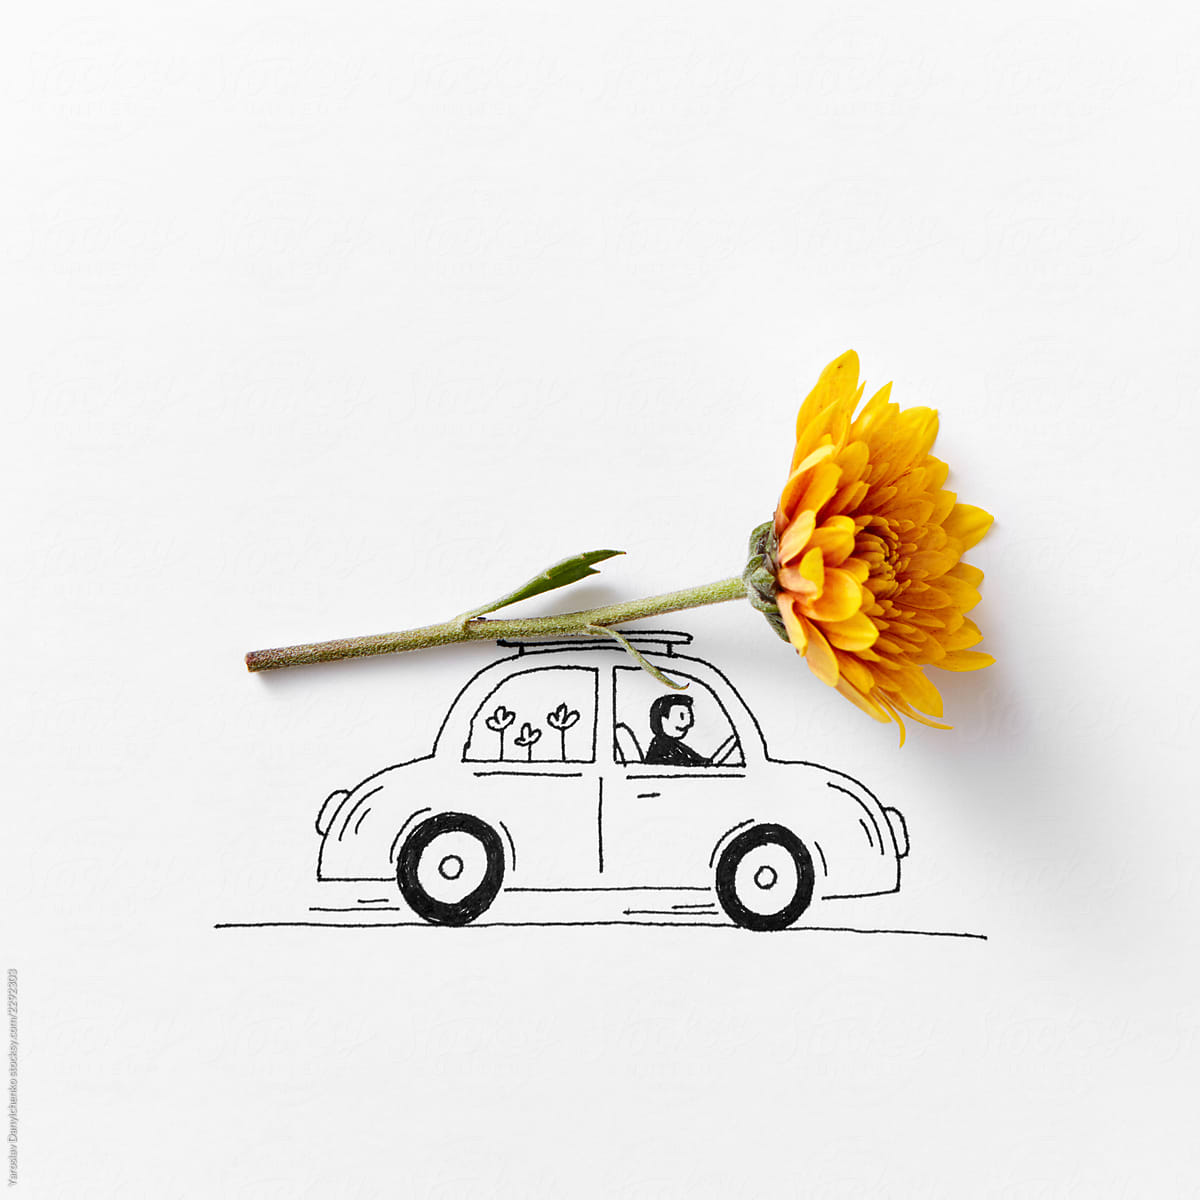 Drawing car with a man carrying an orange flower on a gray backg